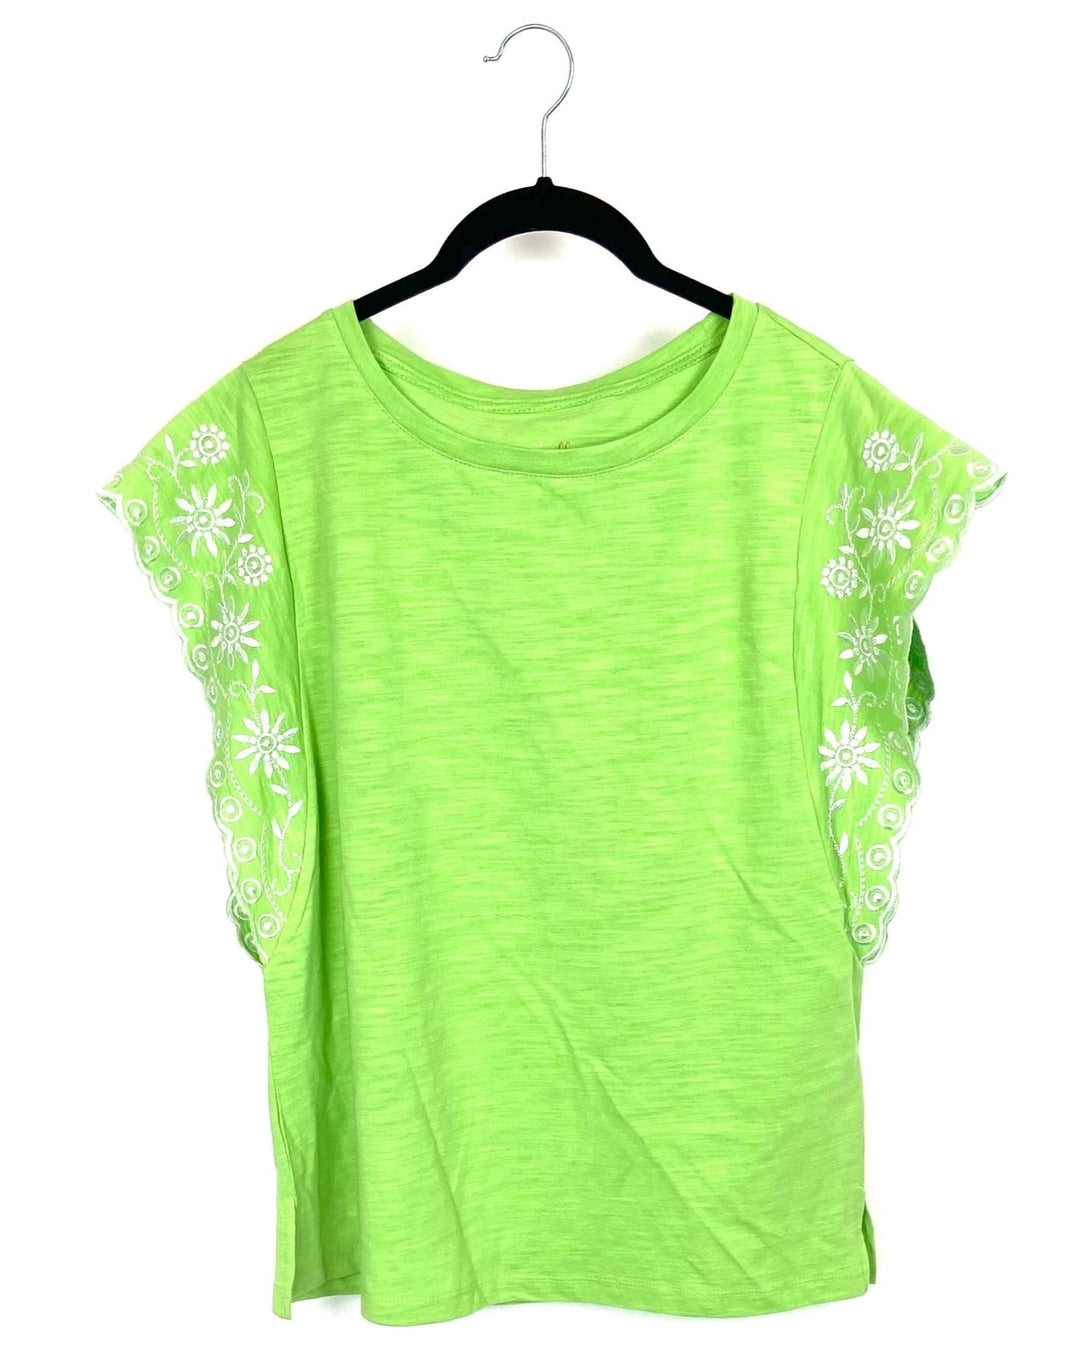 Lime Green Blouse - Small/Medium and Large/Extra Large